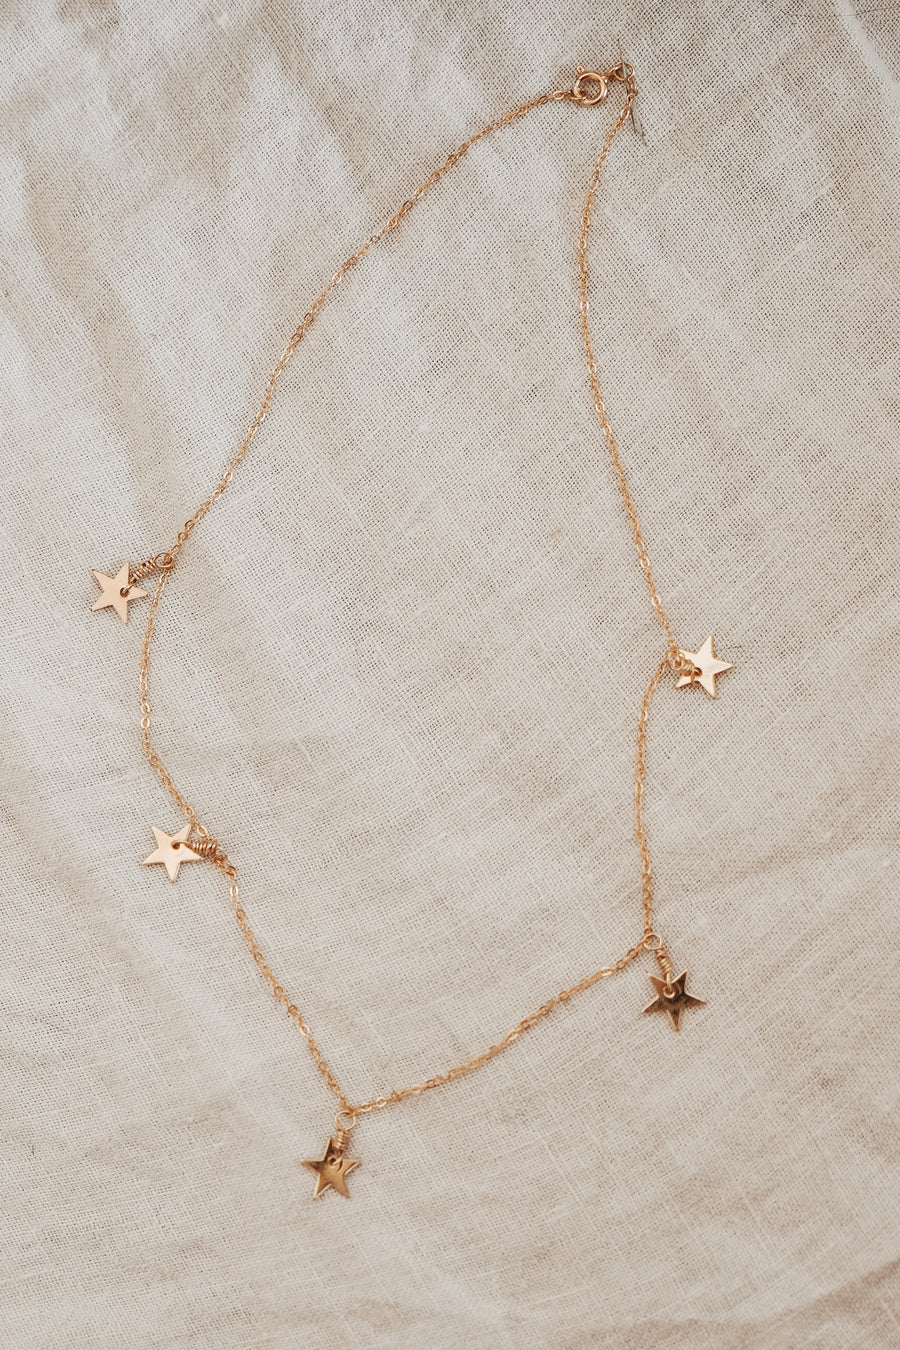 The Star Chain in 14k Gold-Fill